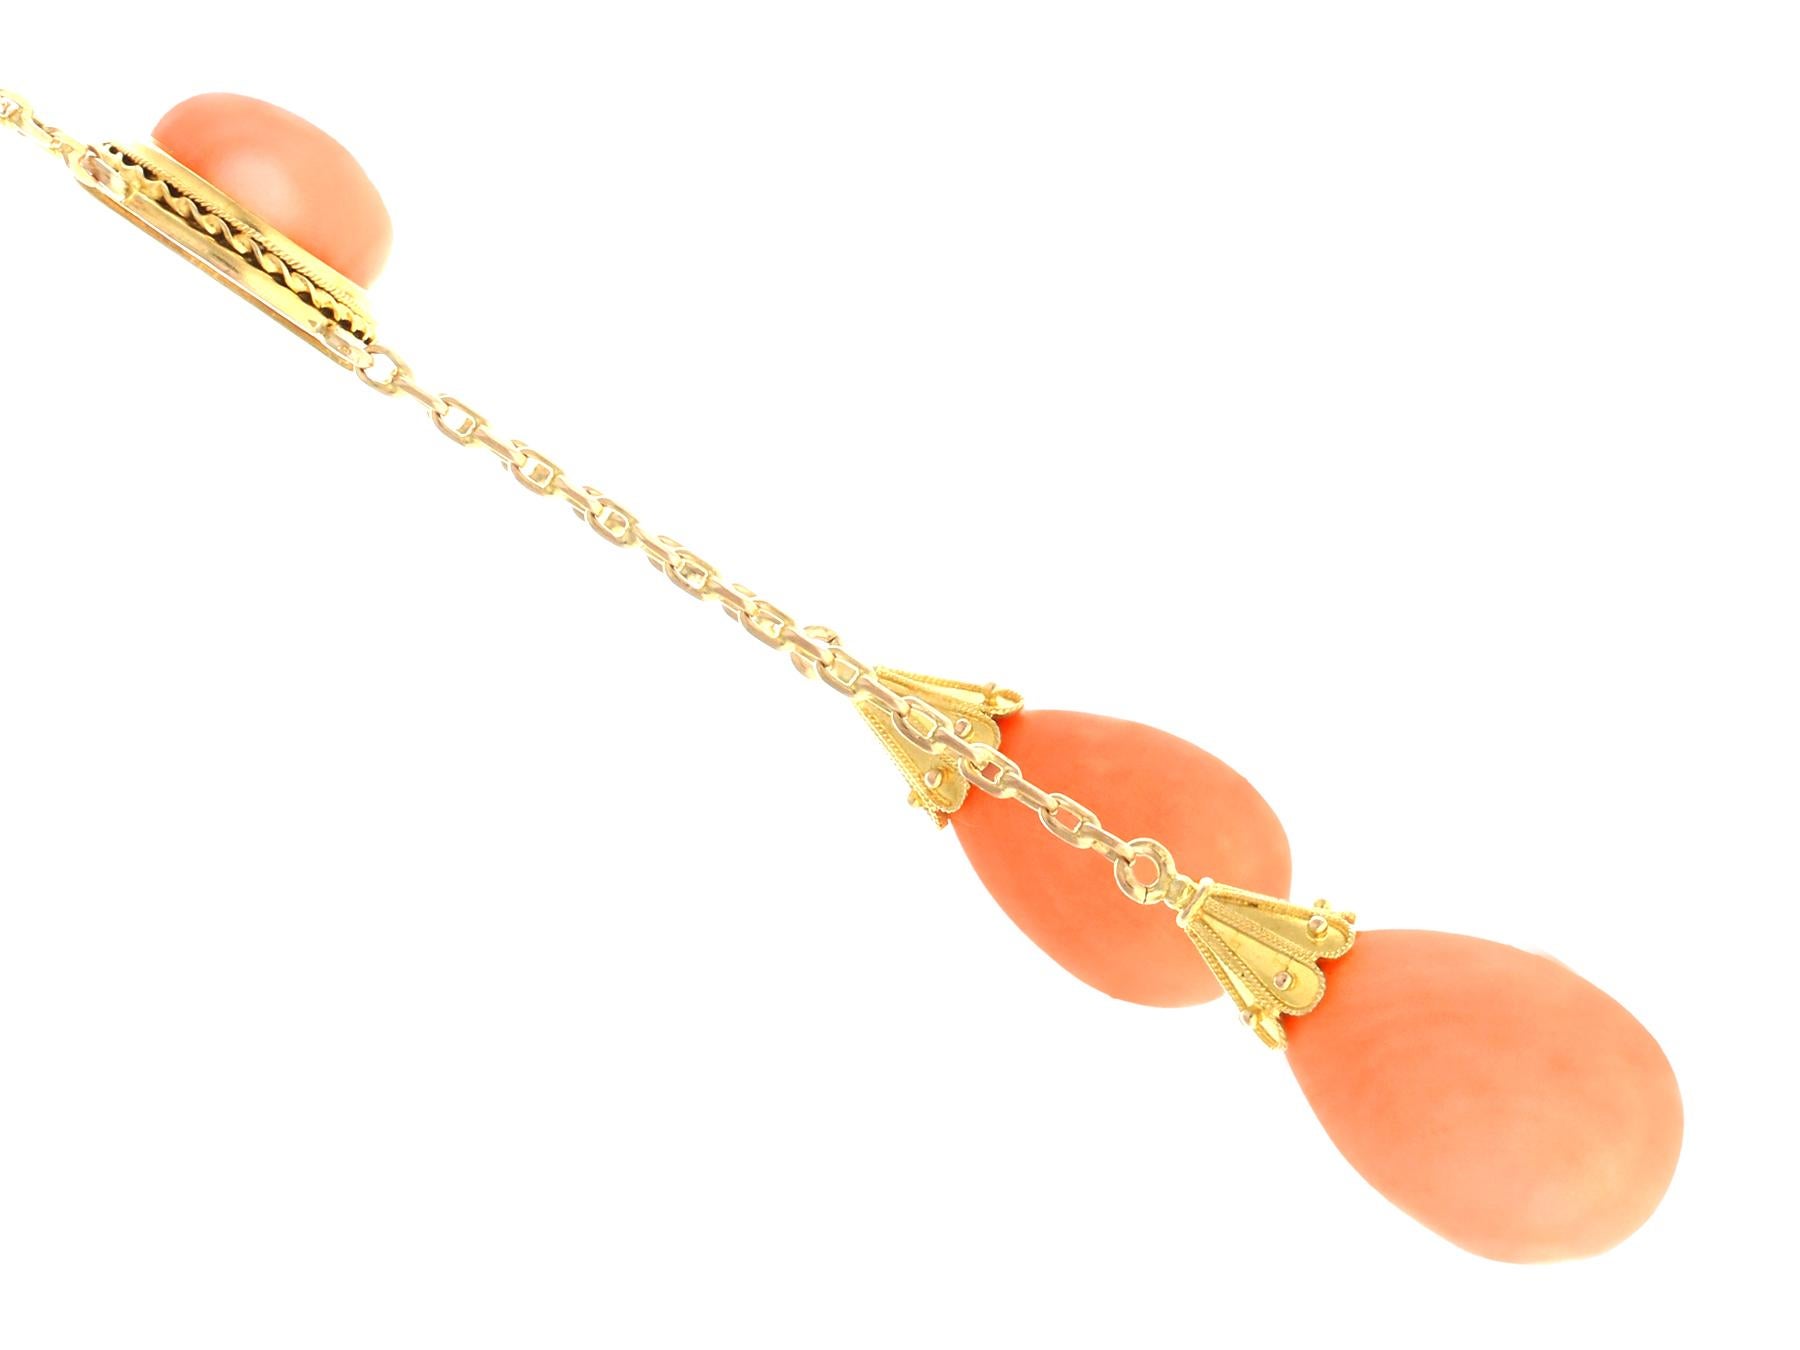 Antique Victorian 35.22 Carat Cabochon Cut Coral and Yellow Gold Necklace In Excellent Condition For Sale In Jesmond, Newcastle Upon Tyne